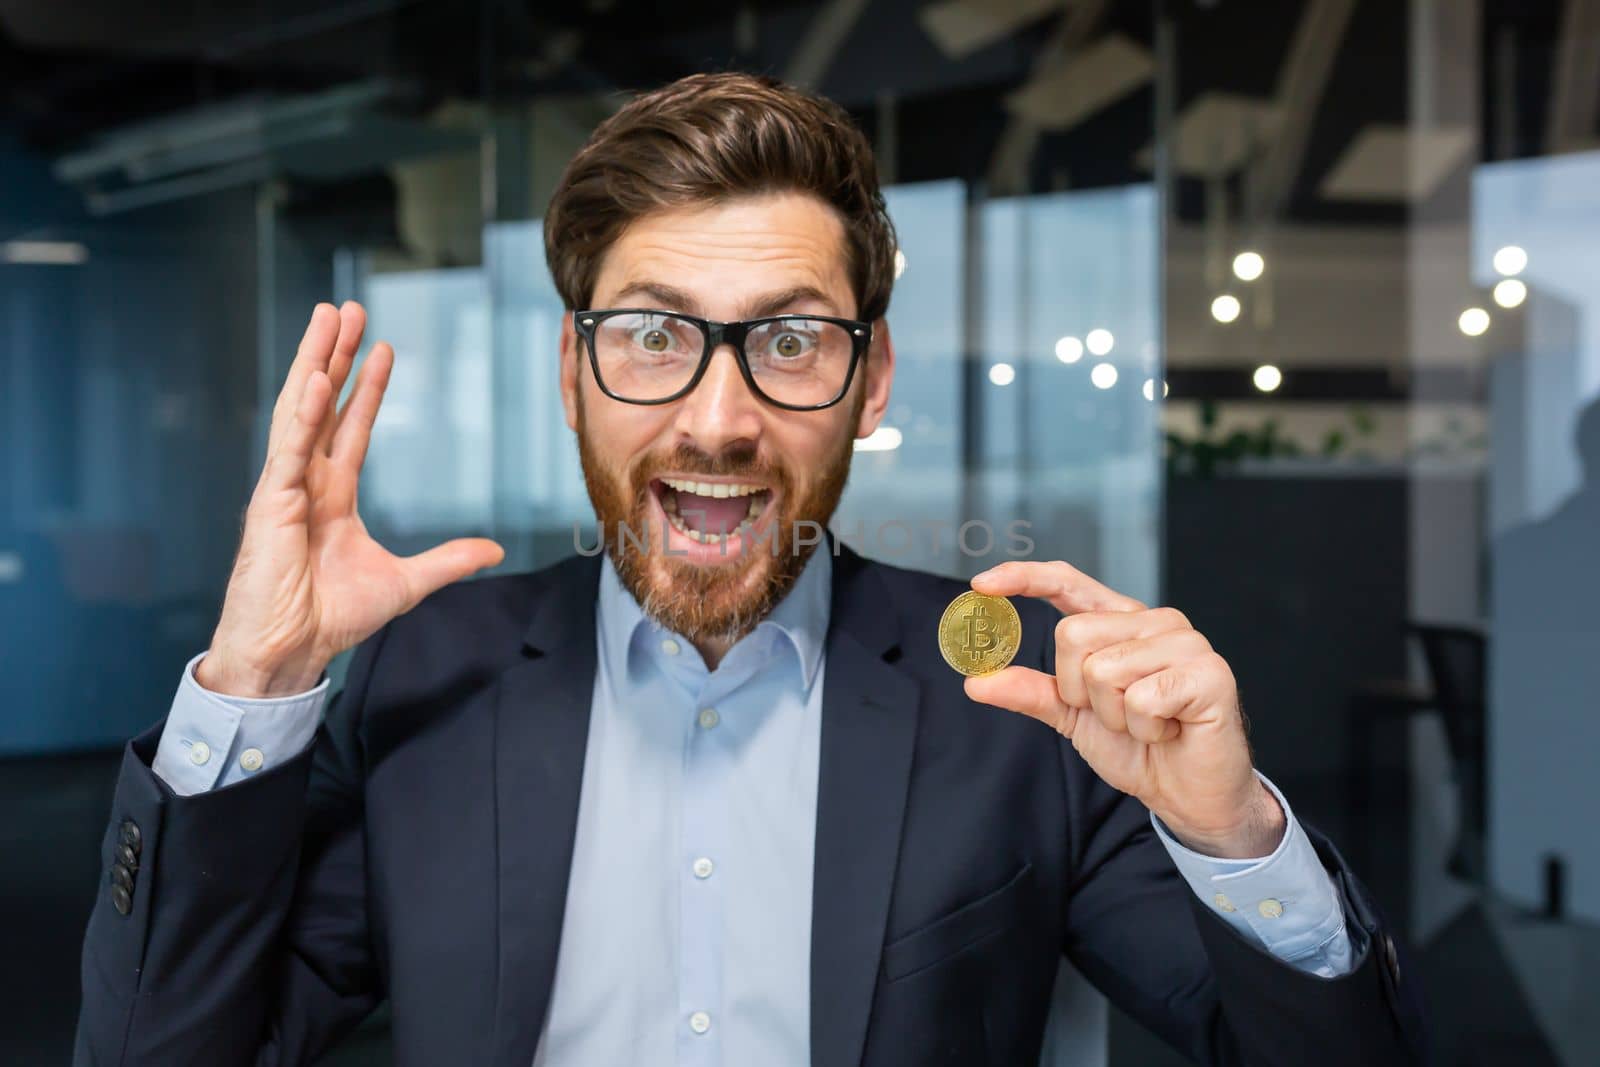 Concept, close-up photo. A young business man holds a gold coin, cryptocurrency in his hand. He looks at the camera, screams with happiness